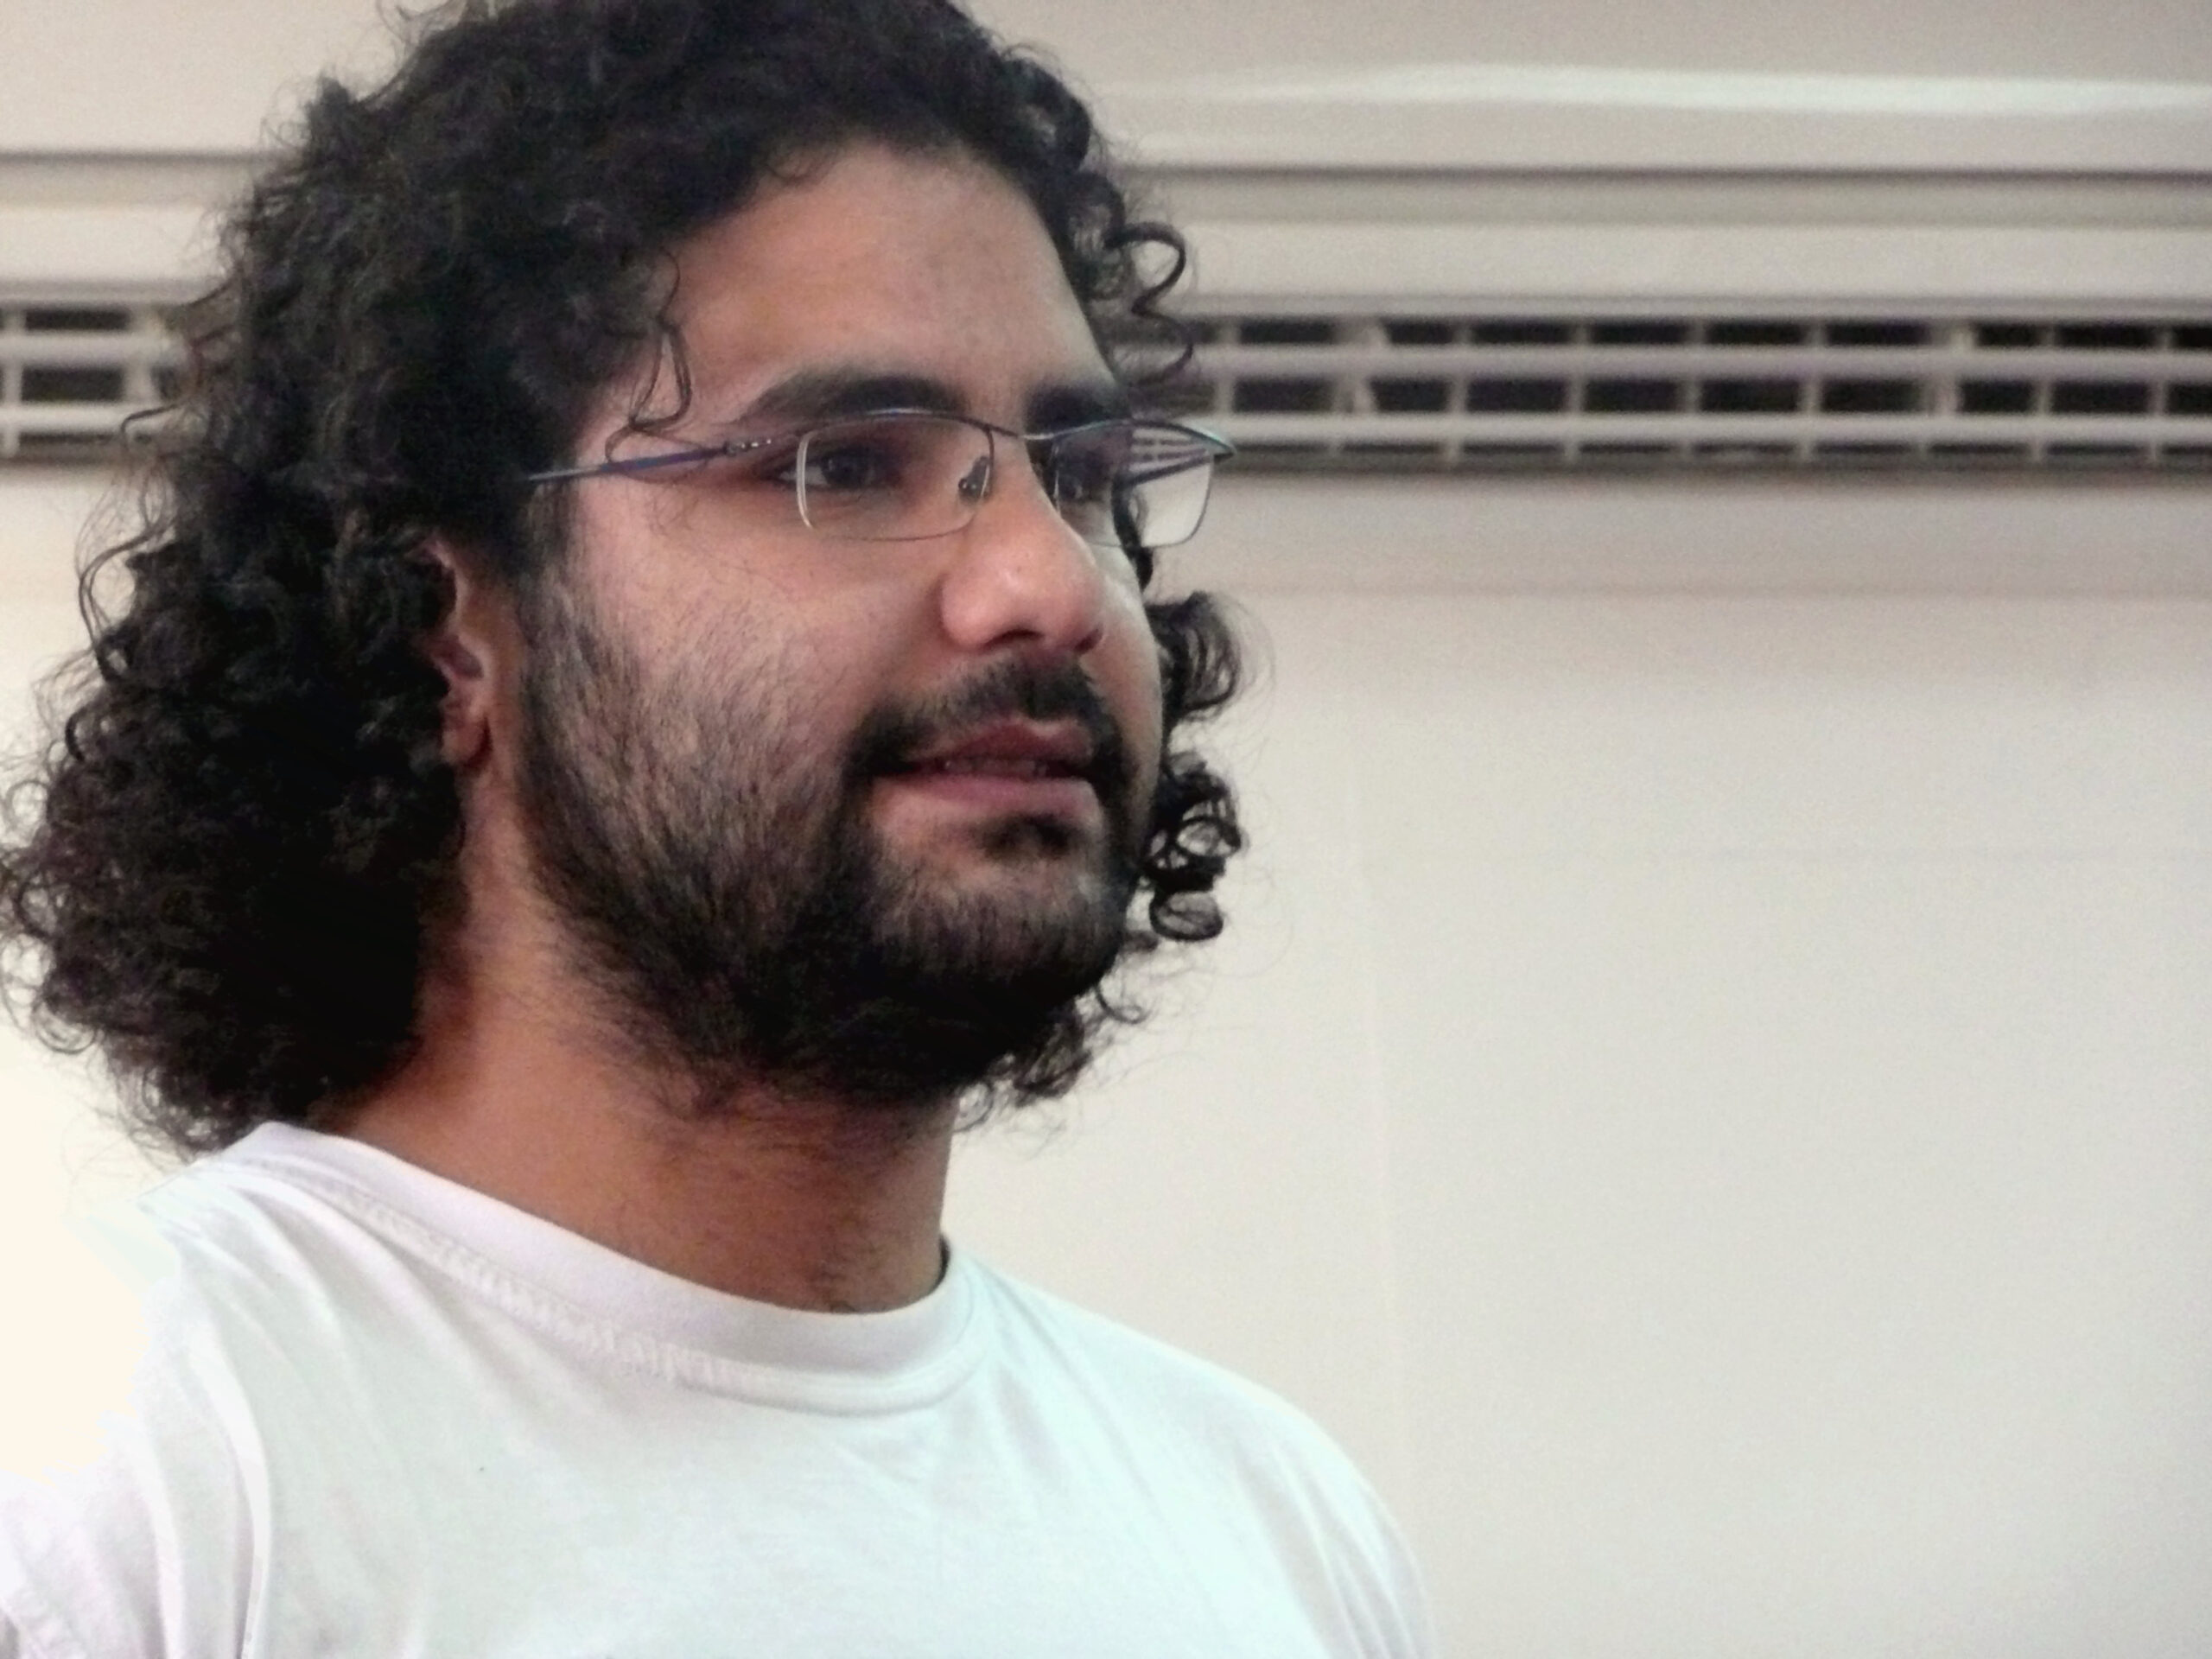 Egypt: World leaders at COP27 must call for release of Alaa Abdel Fattah – activist at risk of death